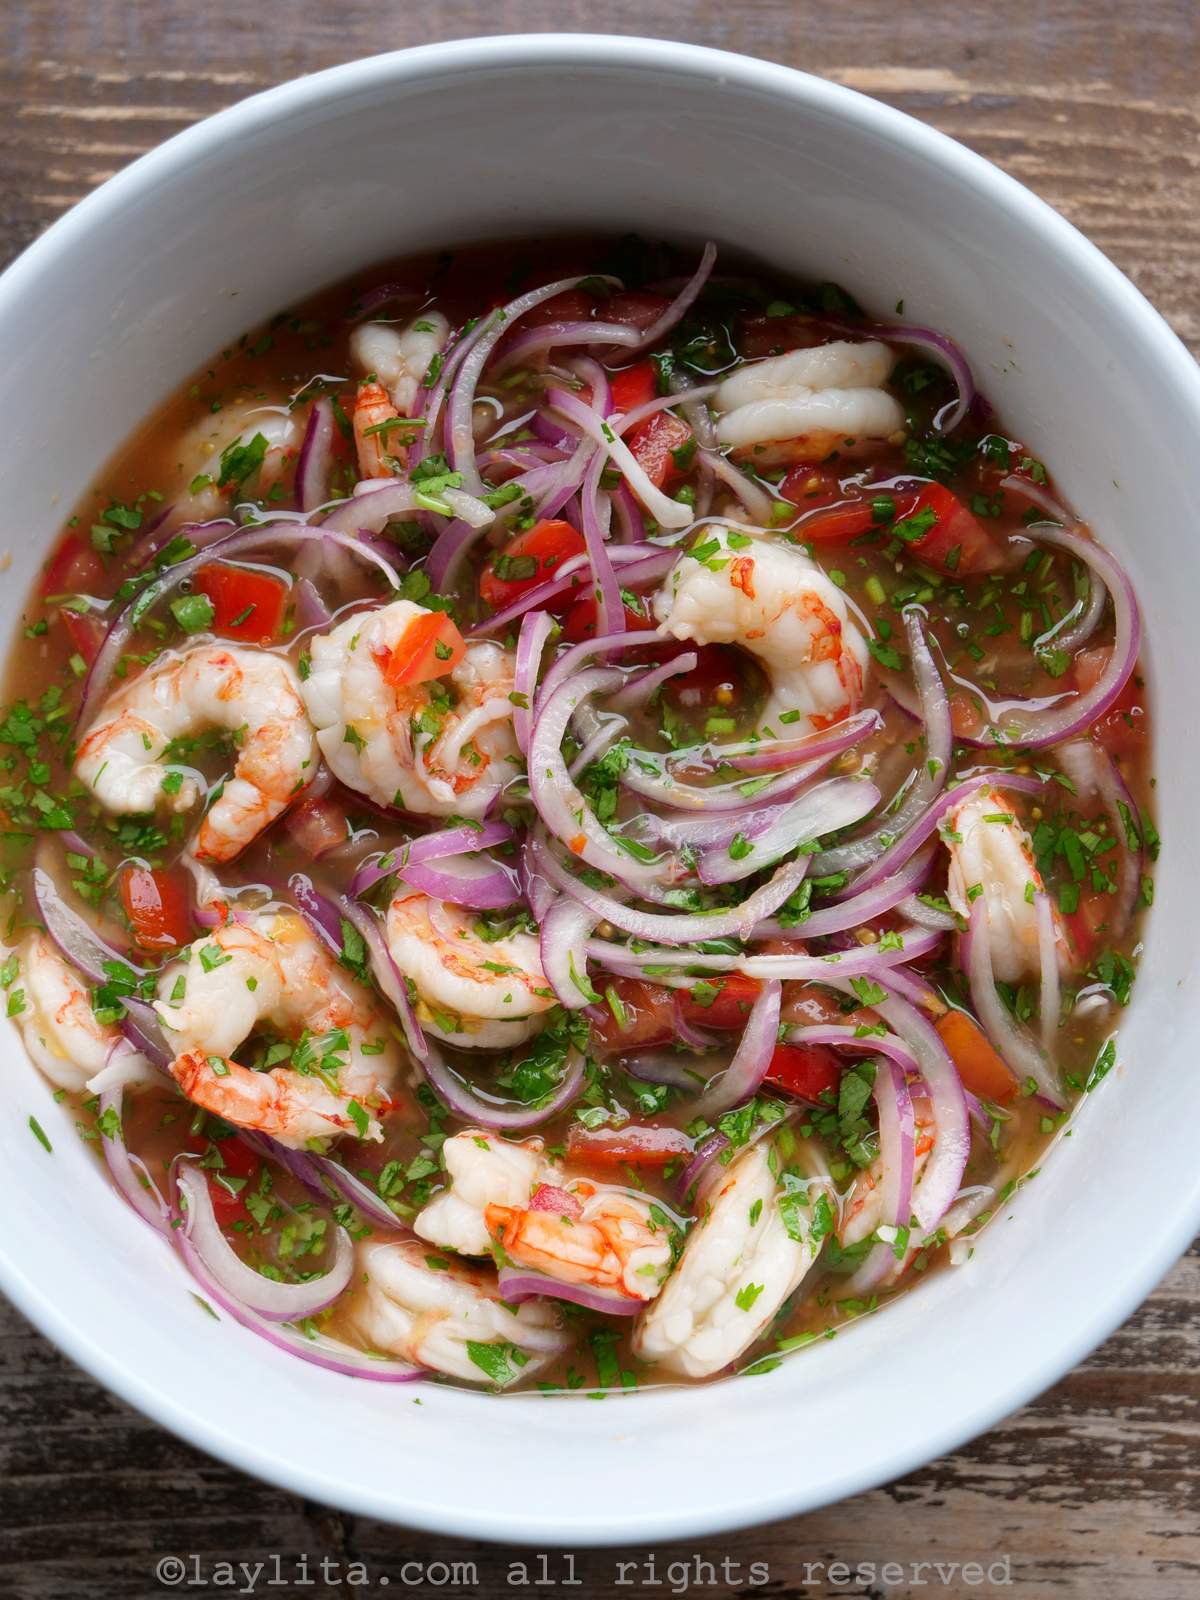 Traditional Ecuadorian shrimp ceviche made with poached shrimp, tomatoes, onions, lime juice, and cilantro in a white bowl